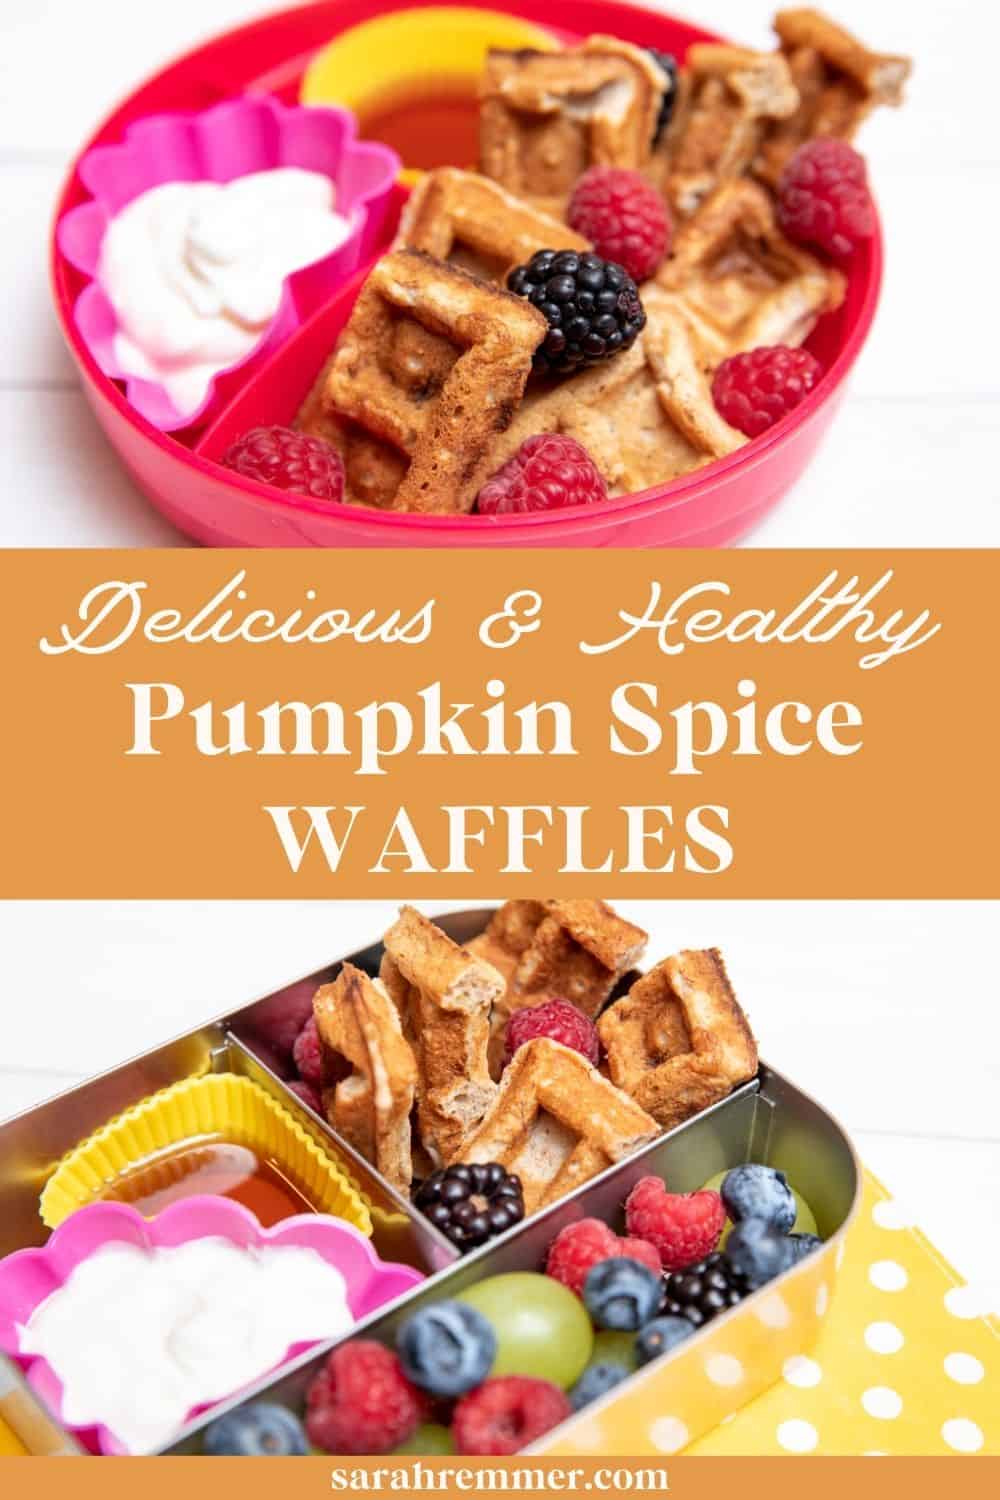 These pumpkin spice waffles are sure to please any crowd! They come together for a quick and nutritious breakfast that kids love.